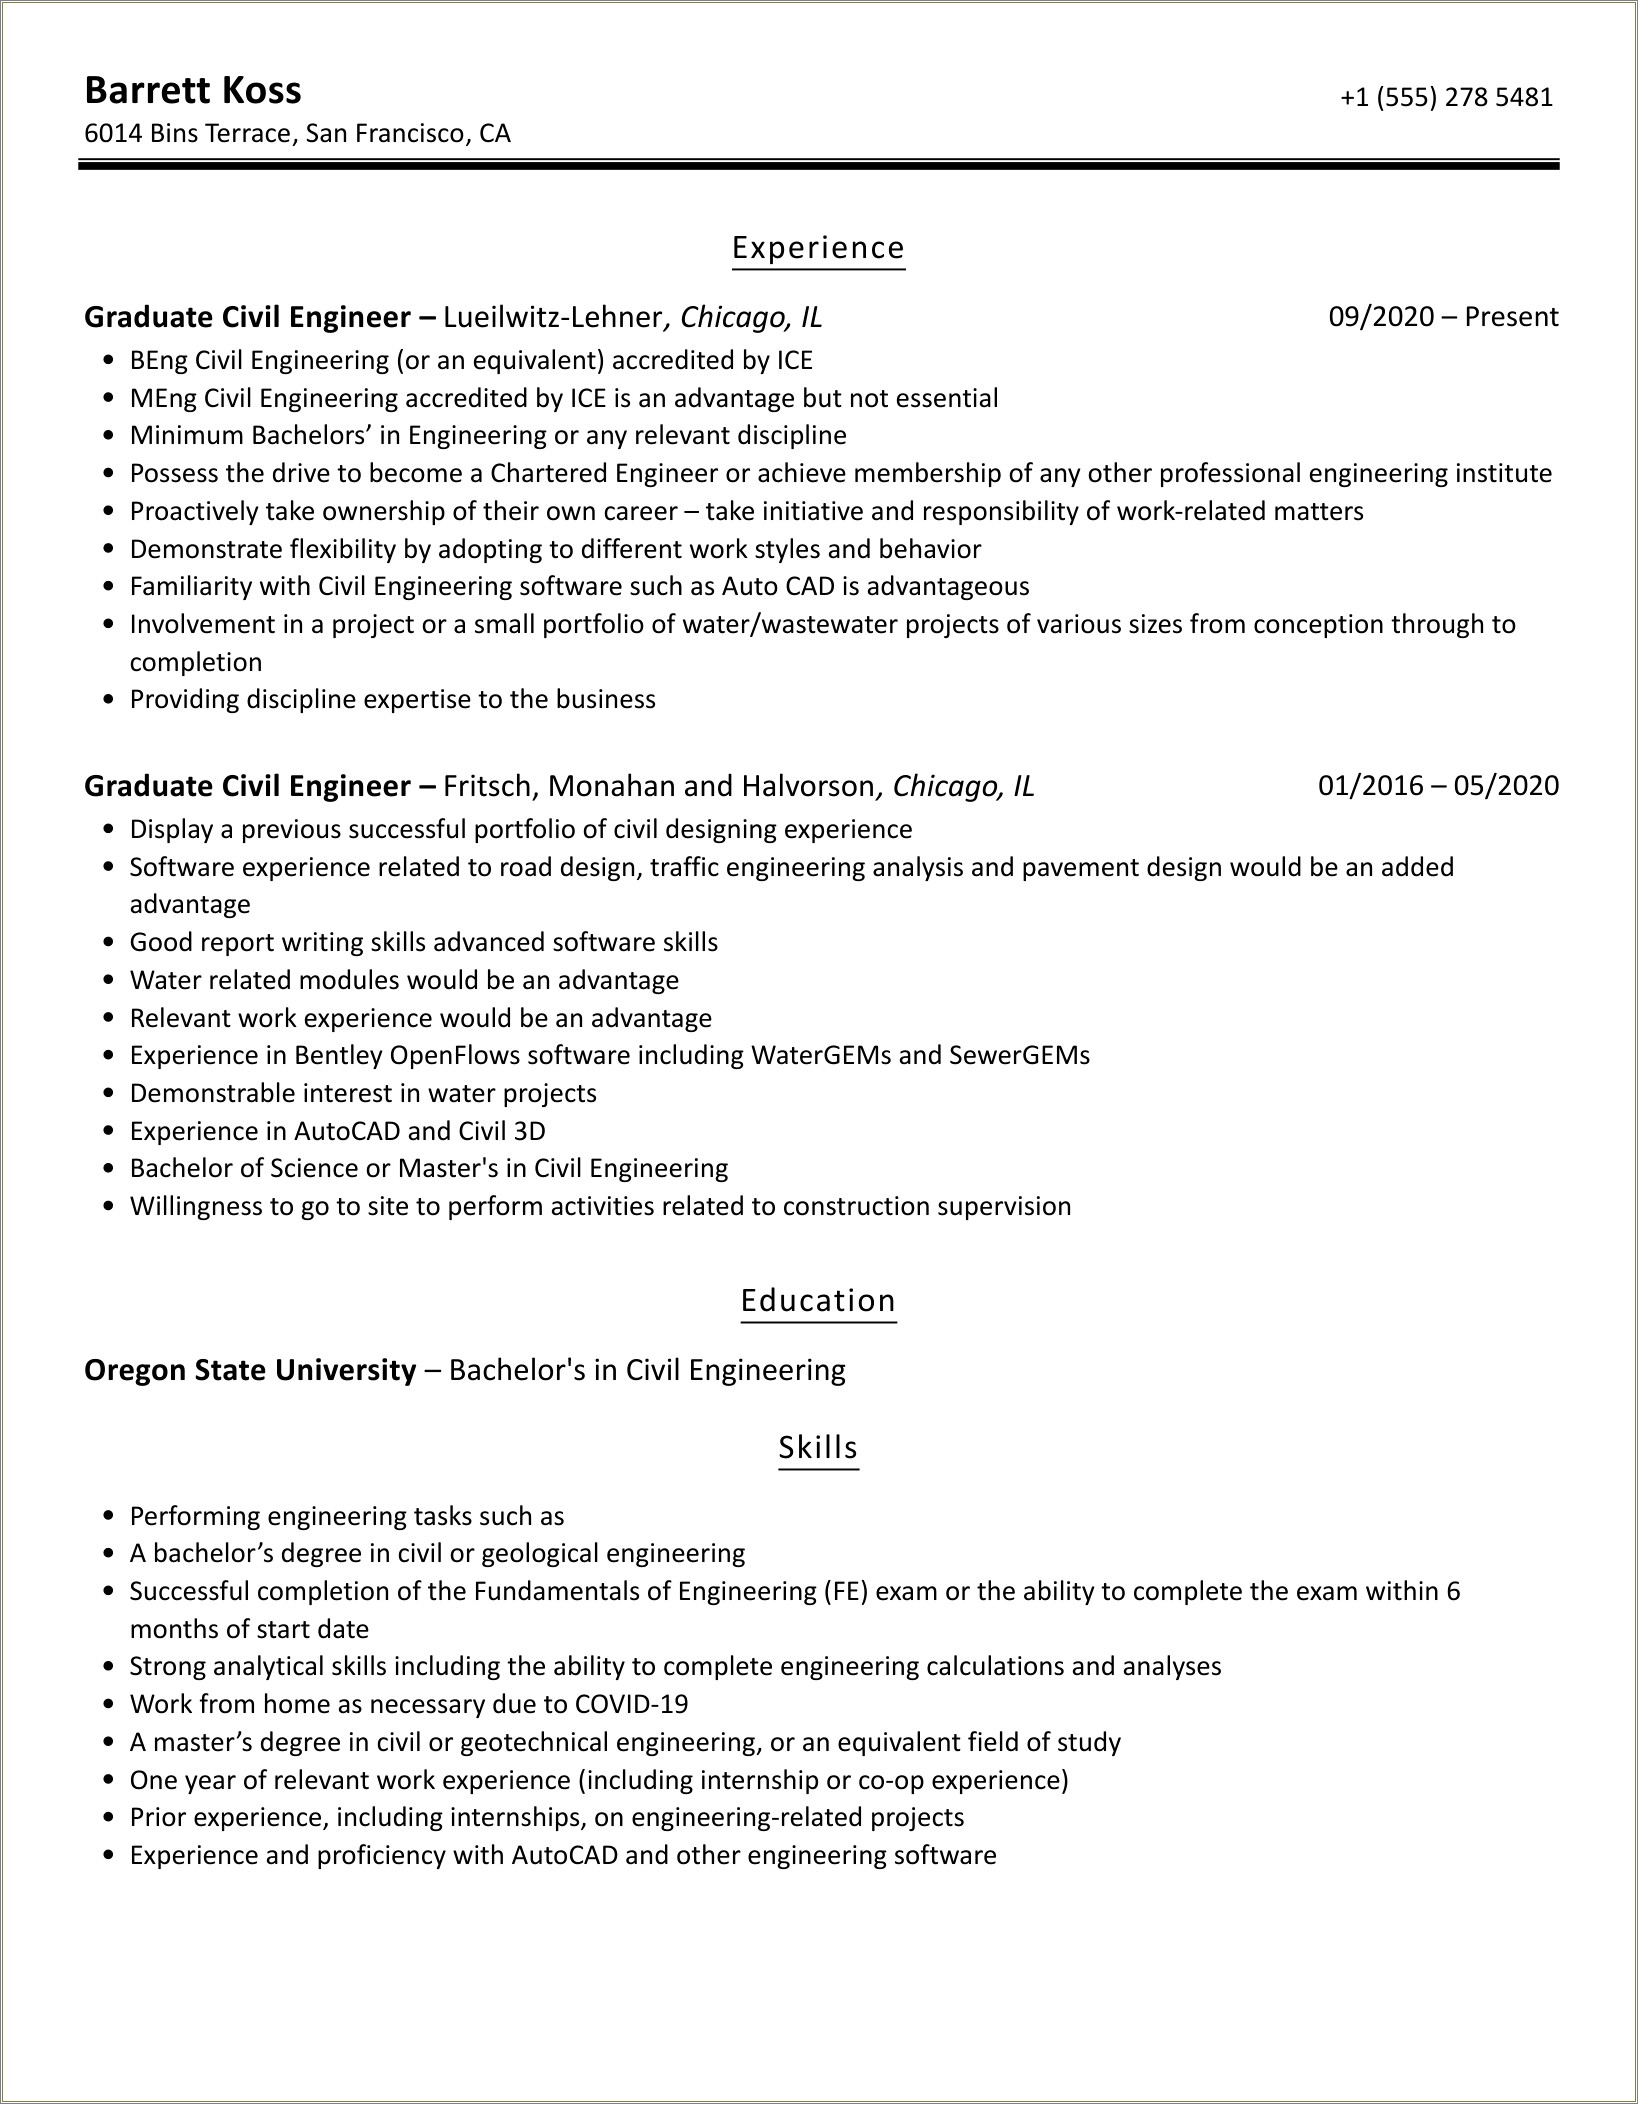 Resume Examples In Construction Graduate Engineer